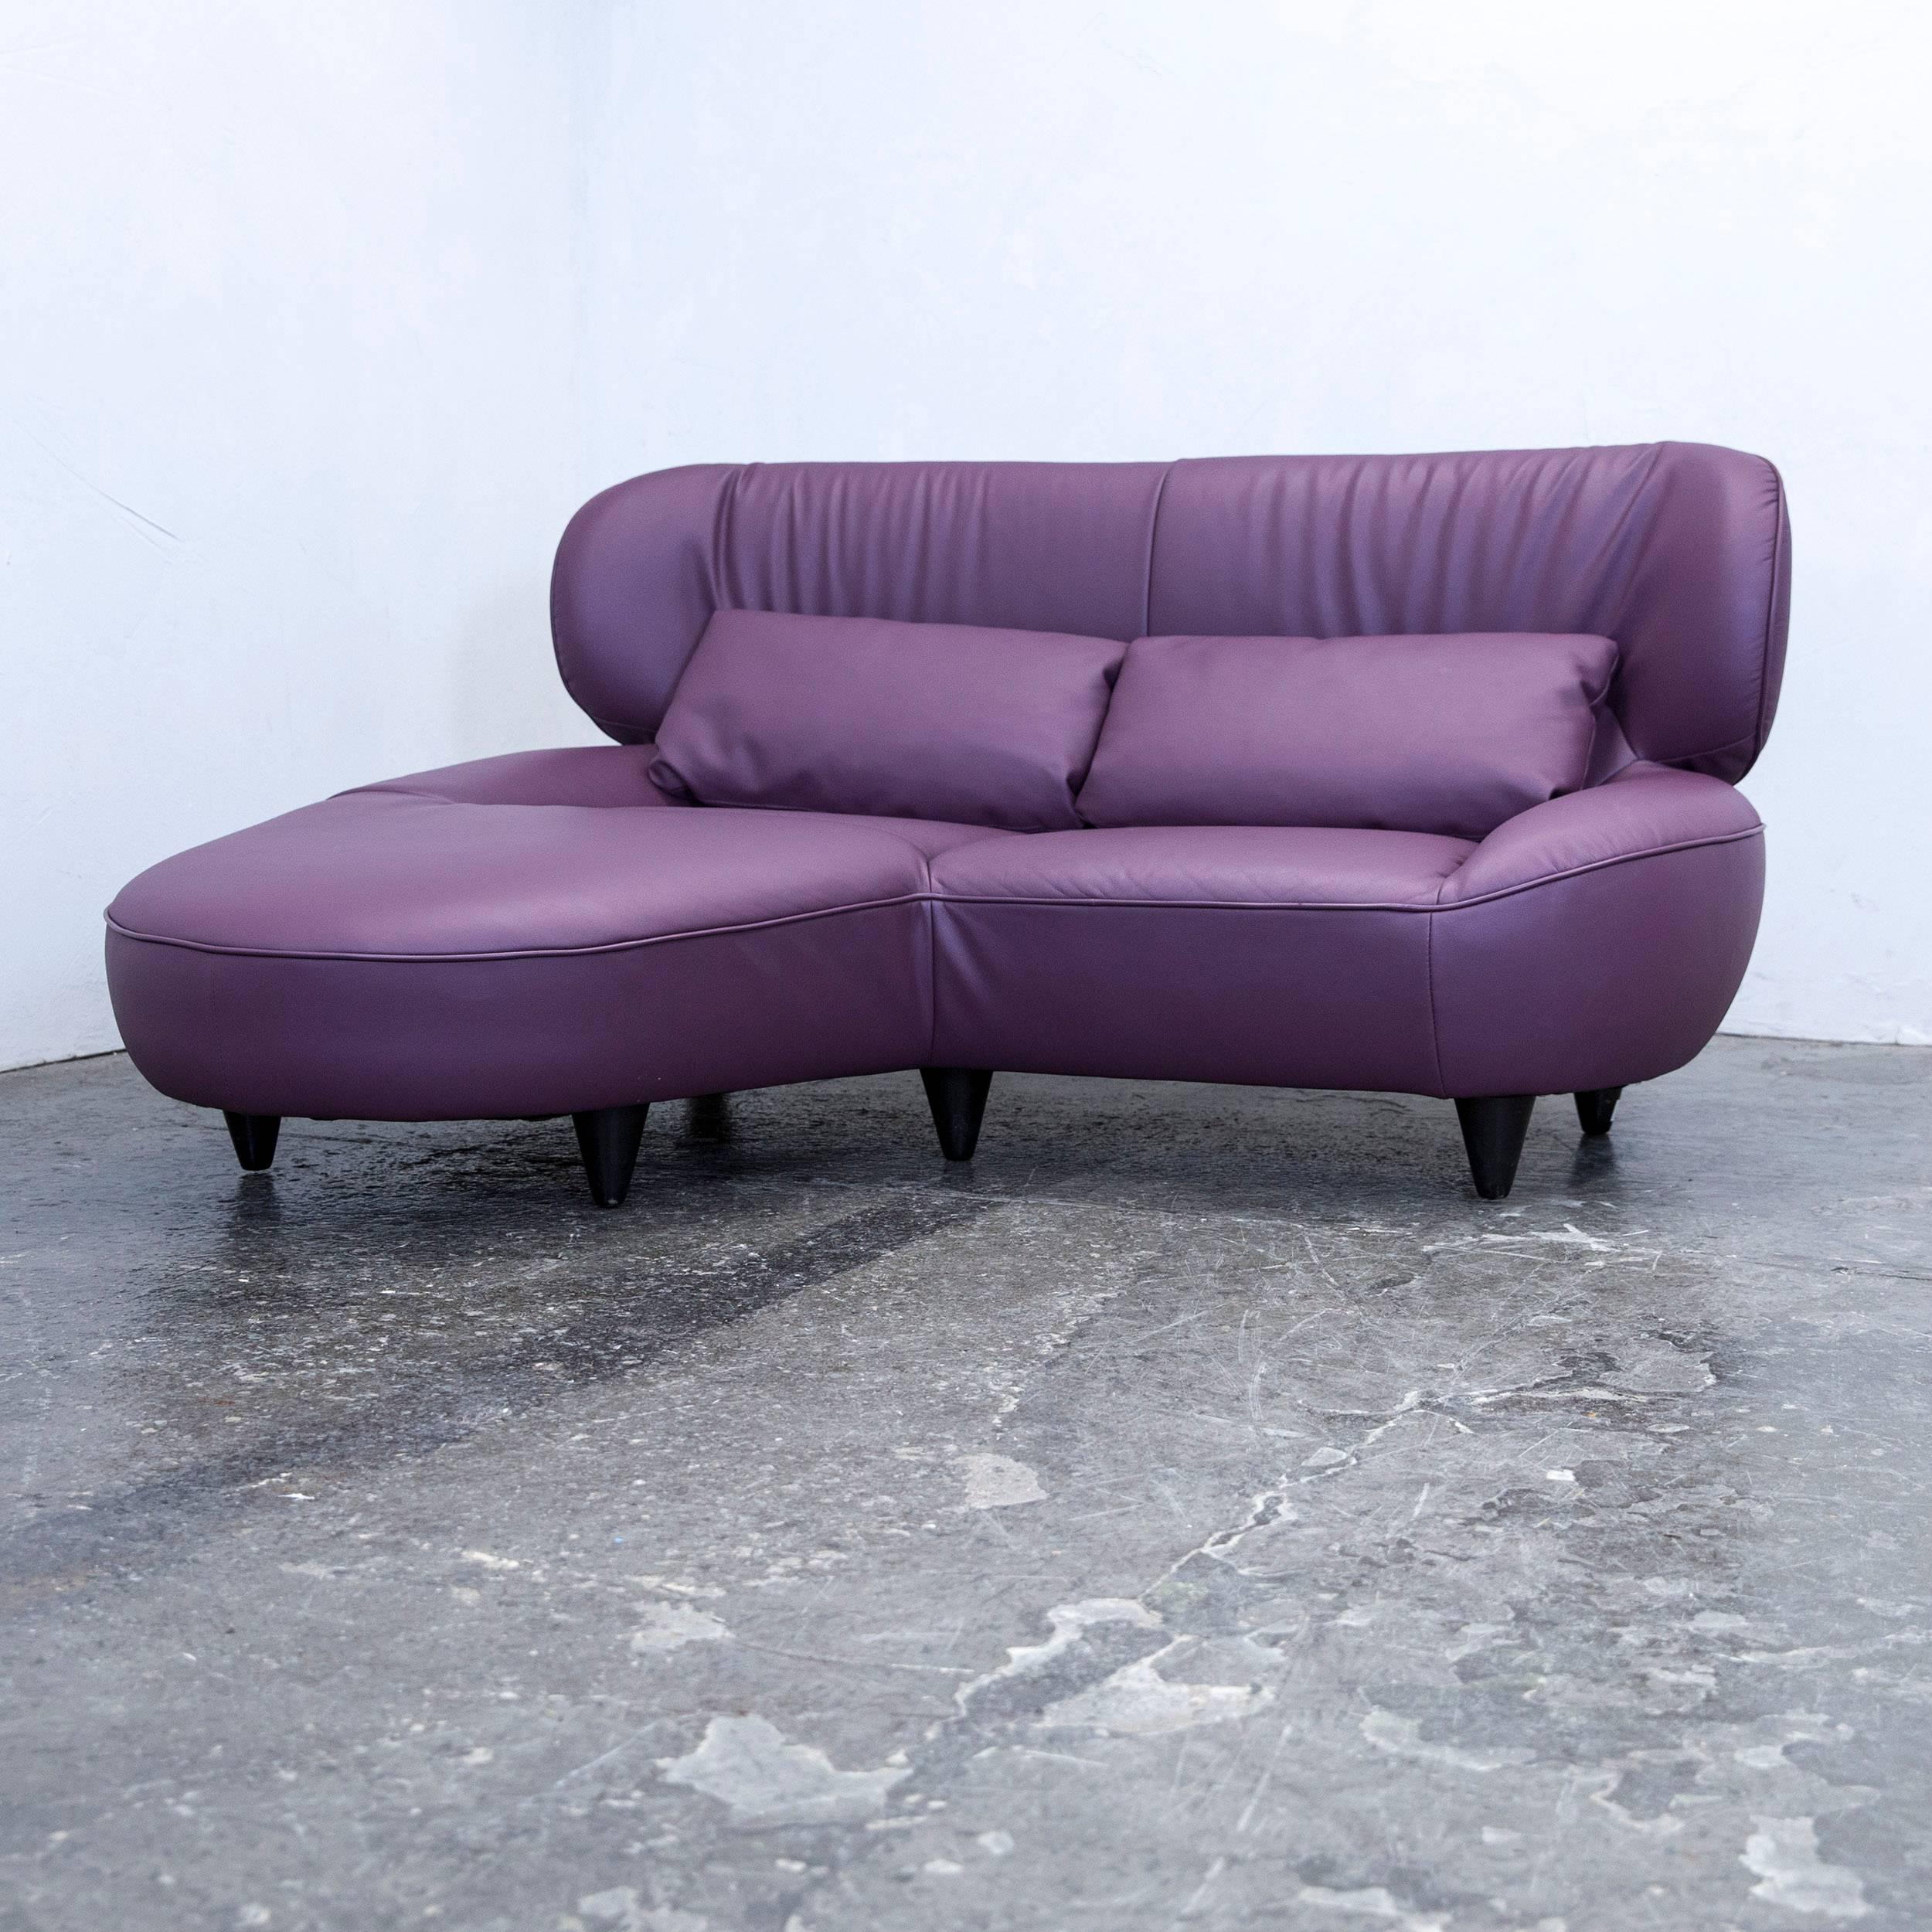 Lilac colored designer corner sofa and footstool in a minimalistic and modern design, made for pure comfort and style.